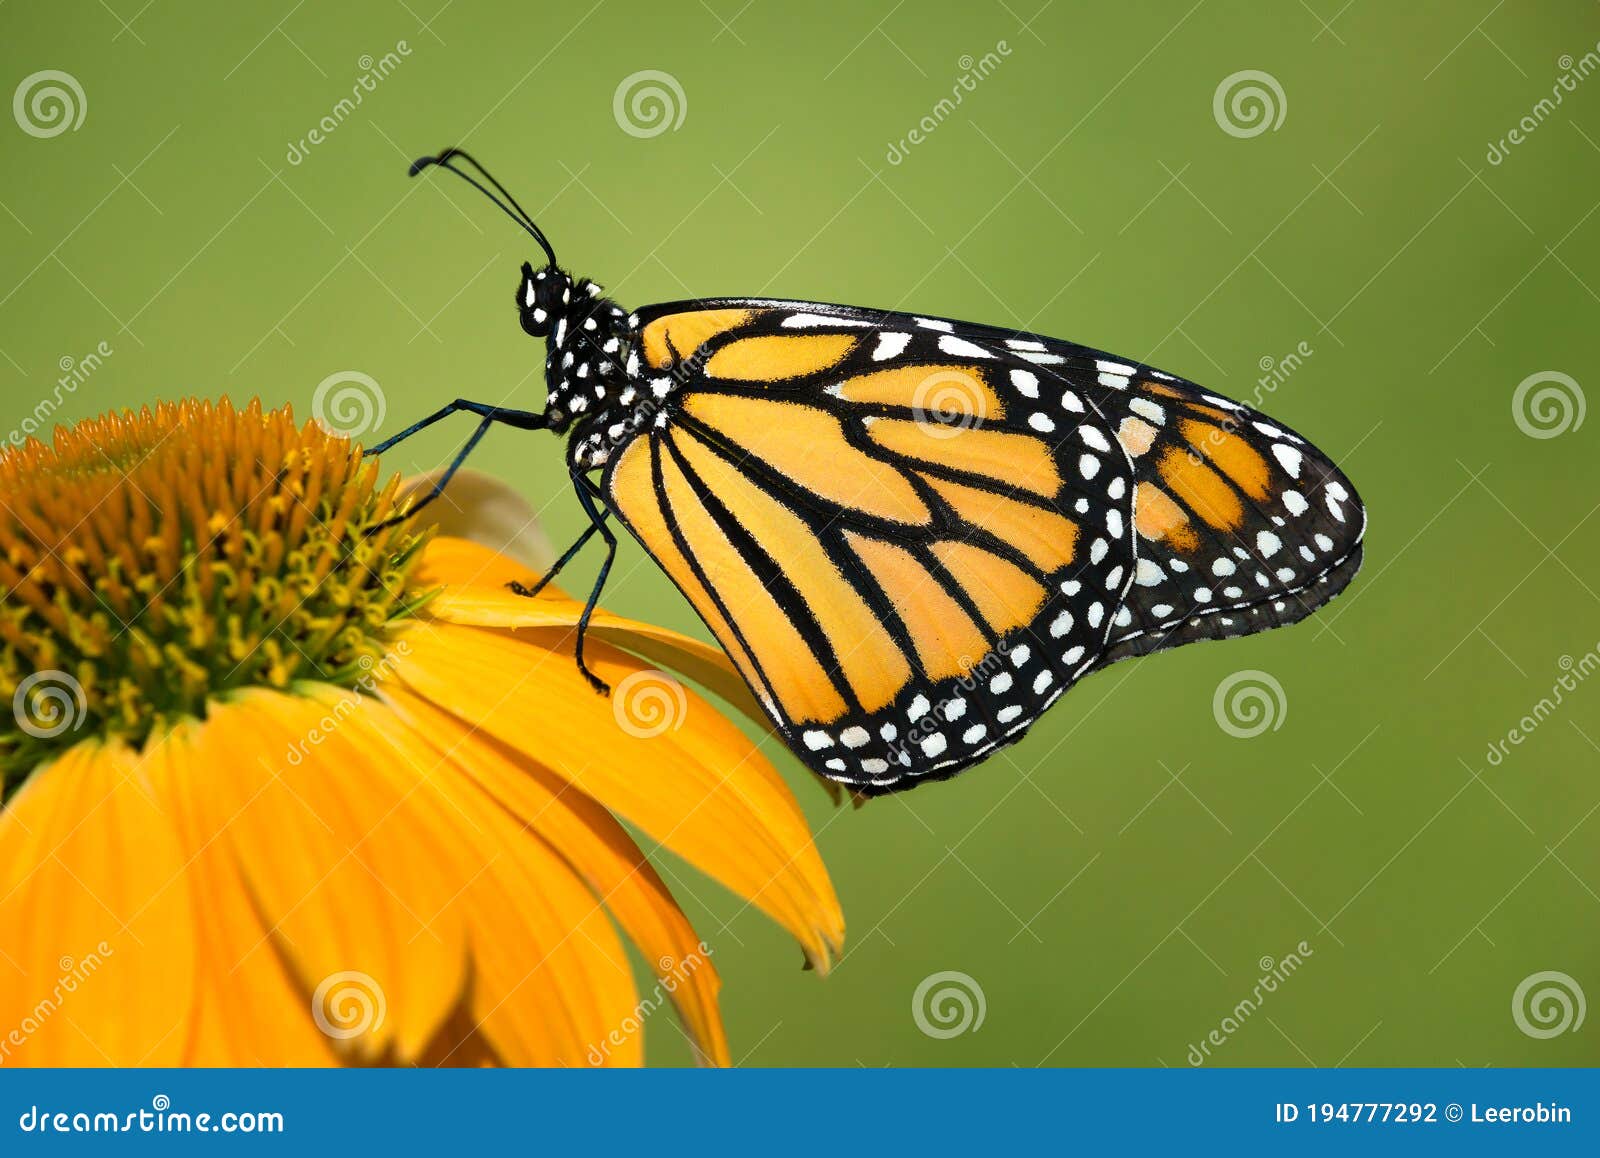 newly emerged monarch butterfly on coneflower